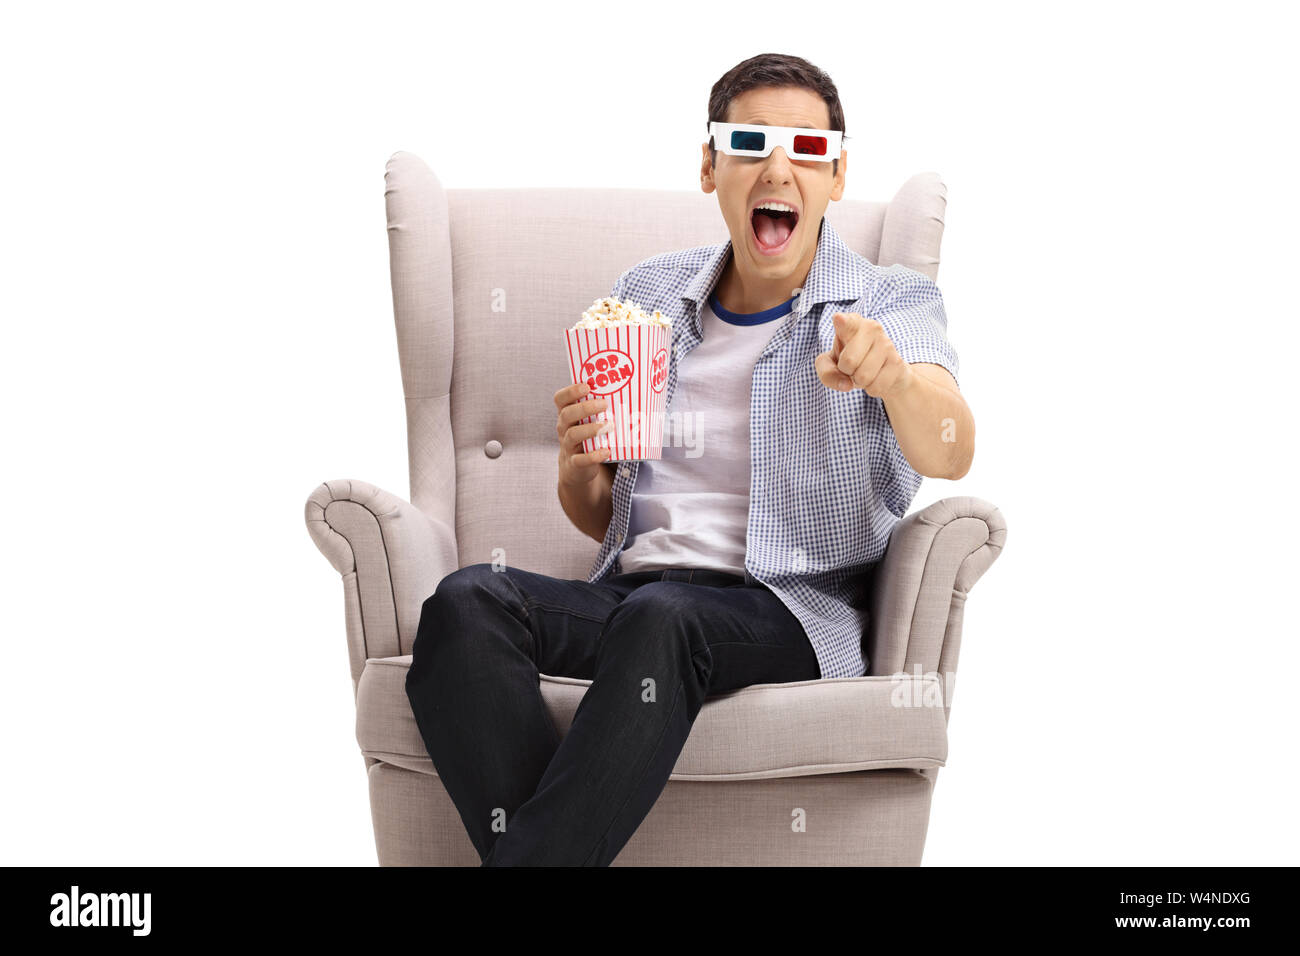 Guy with 3D glasses and popcorn in an armchair laughing and pointing at the camera isolated on white background Stock Photo